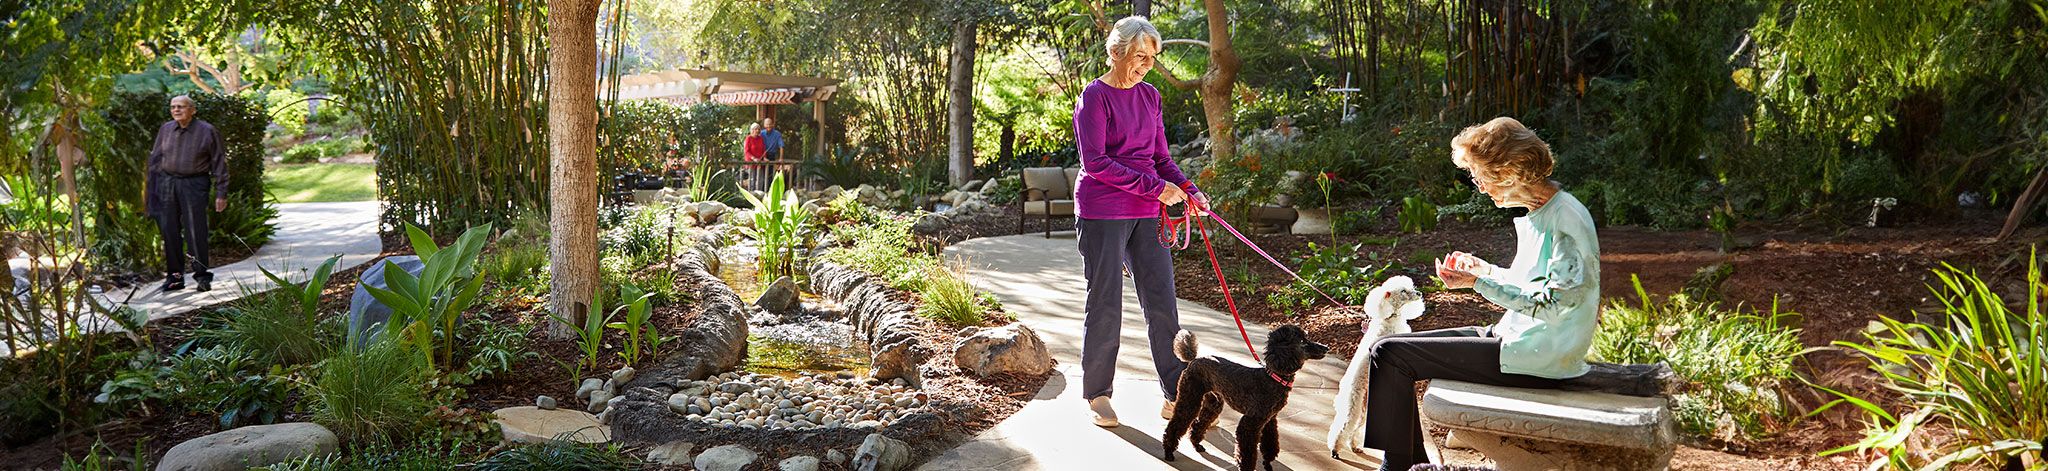 two seniors in outdoor garden converse while walking dogs